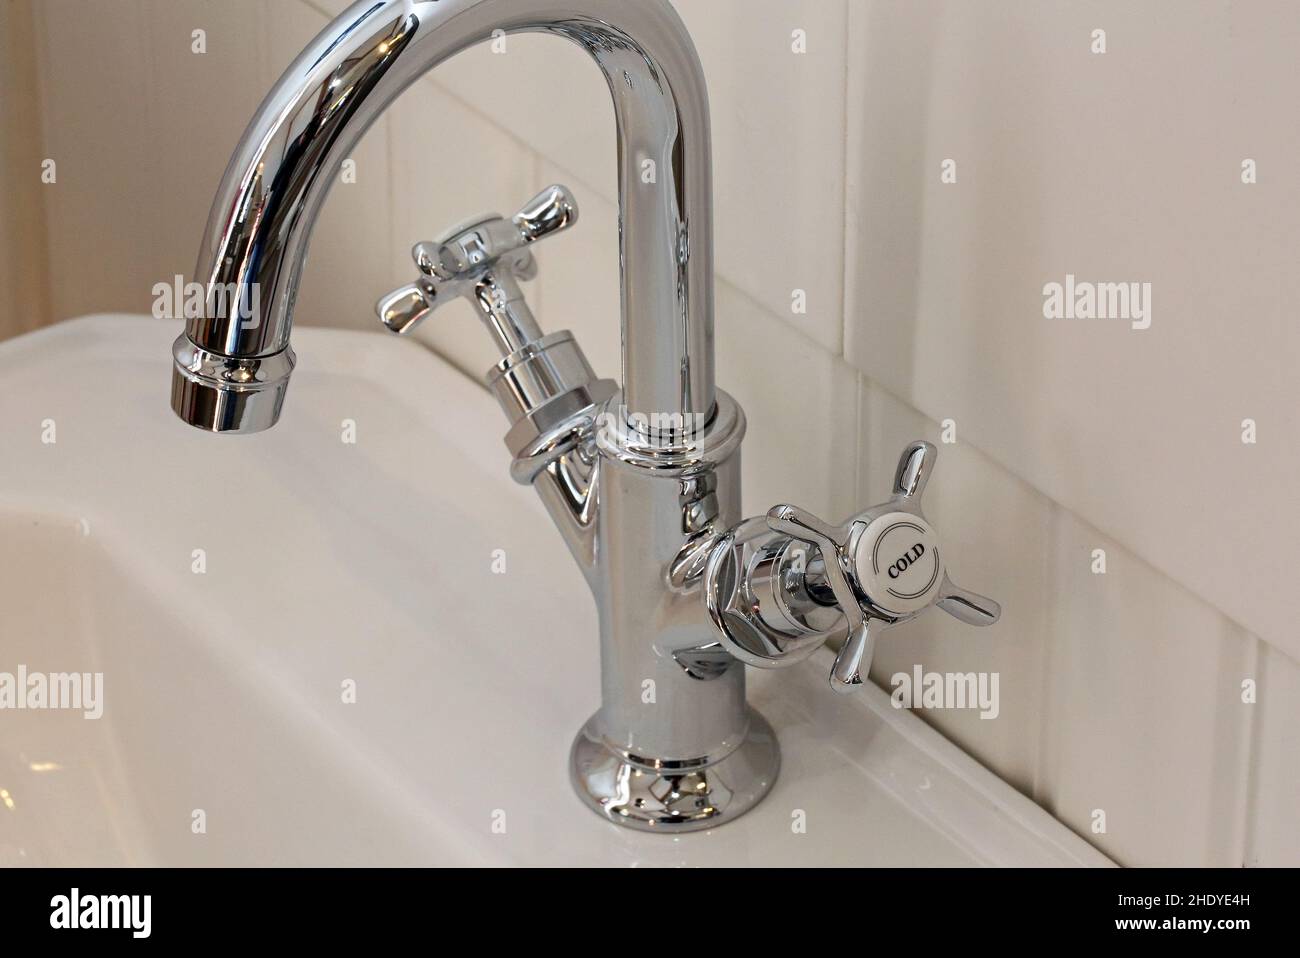 faucet, bathroom fittings, faucets Stock Photo